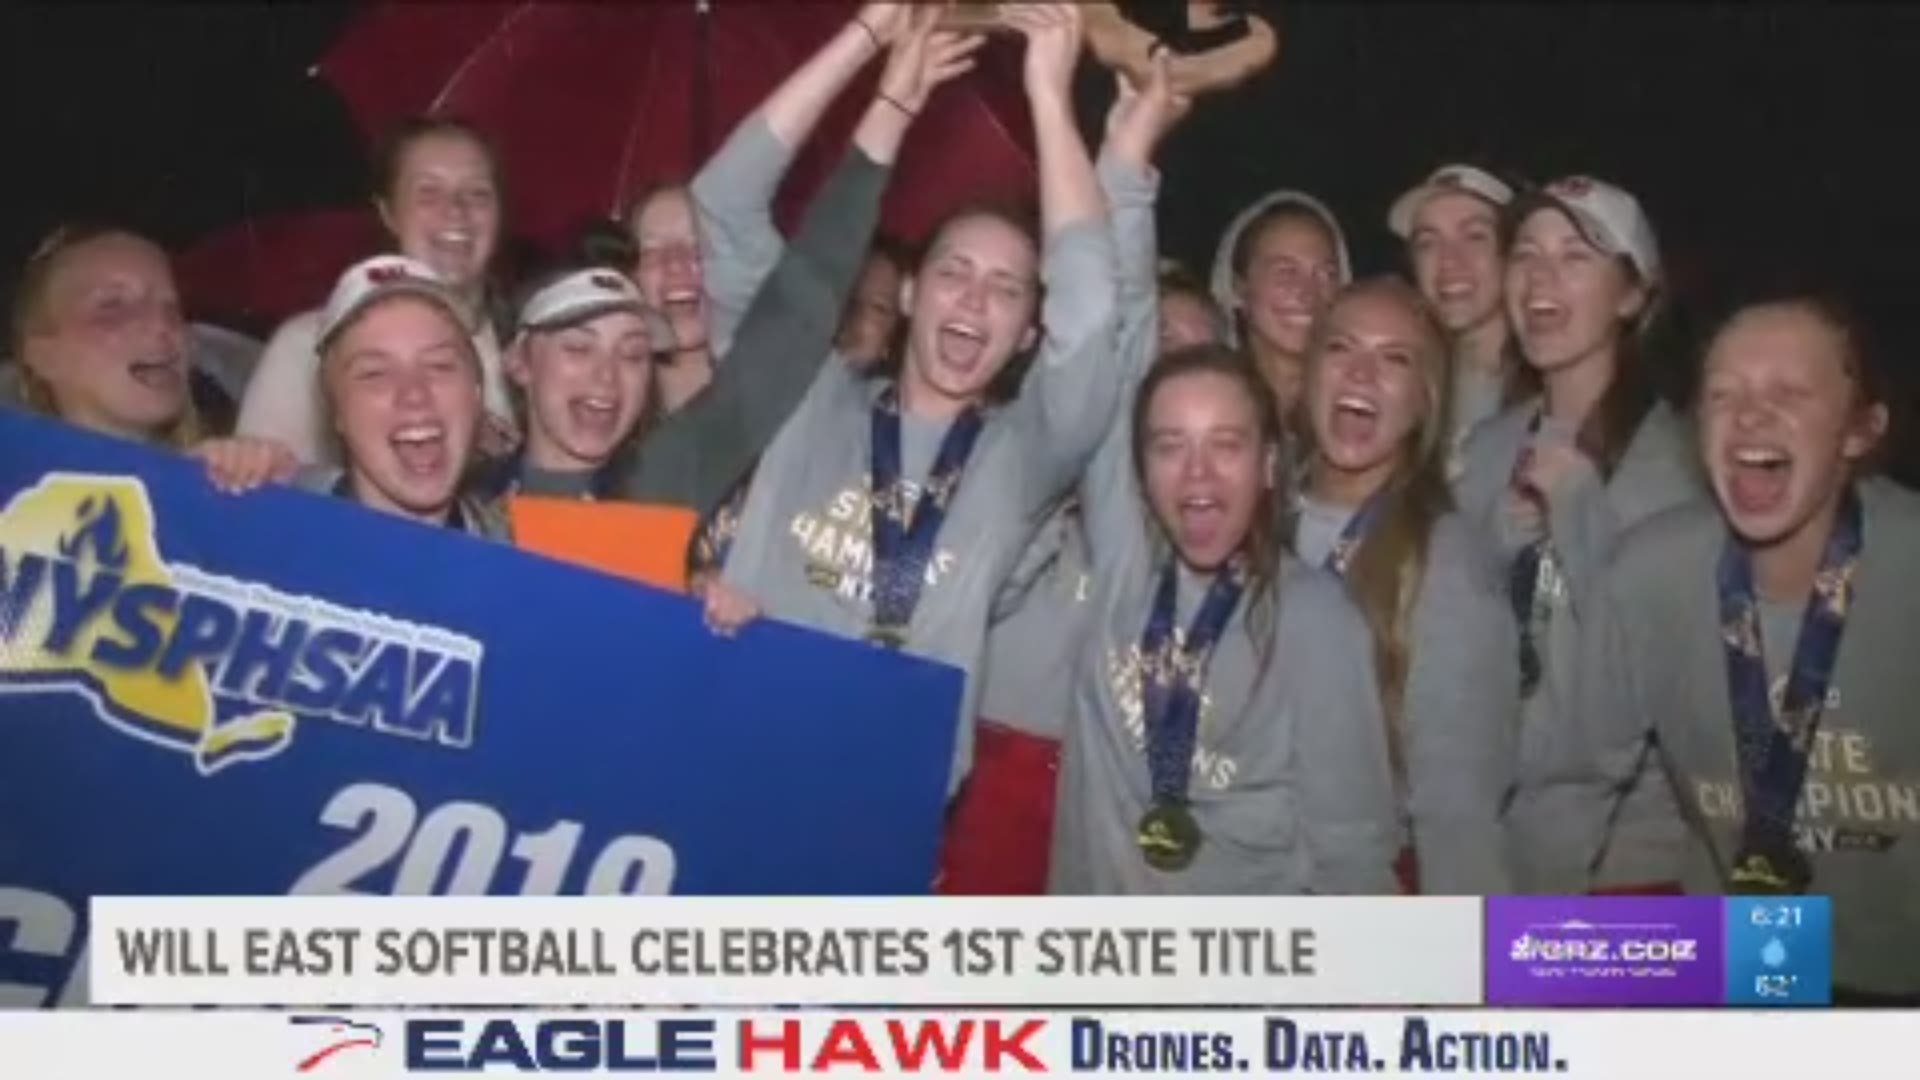 Will East softball was greeted by fans at the high school as the Flames brought home the team's first ever state title.